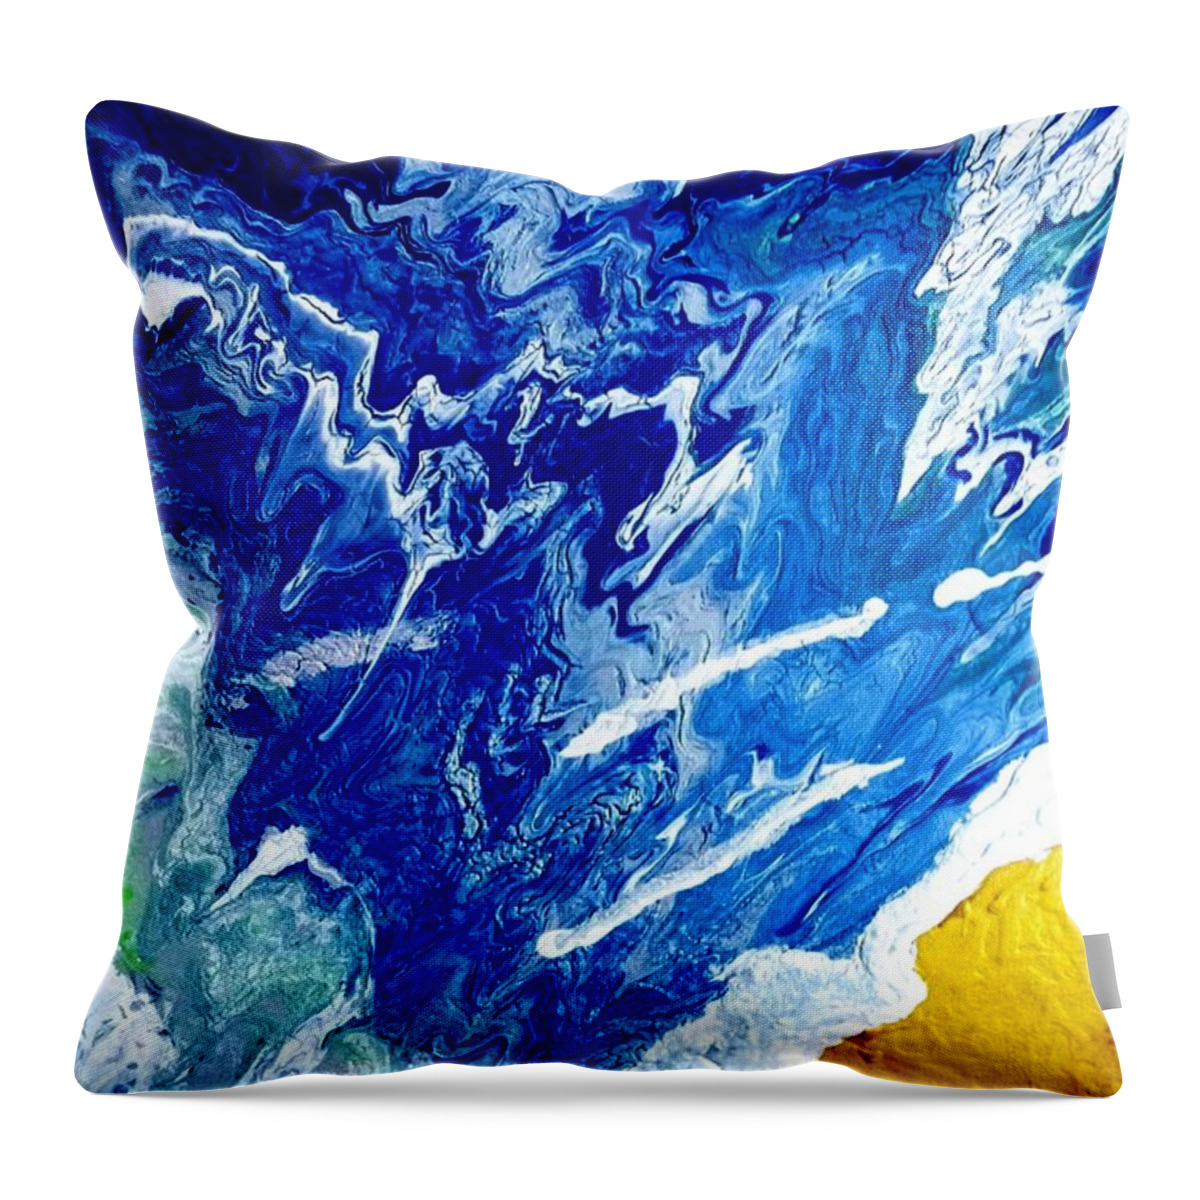 Water Throw Pillow featuring the painting Sand And Surf by Anna Adams